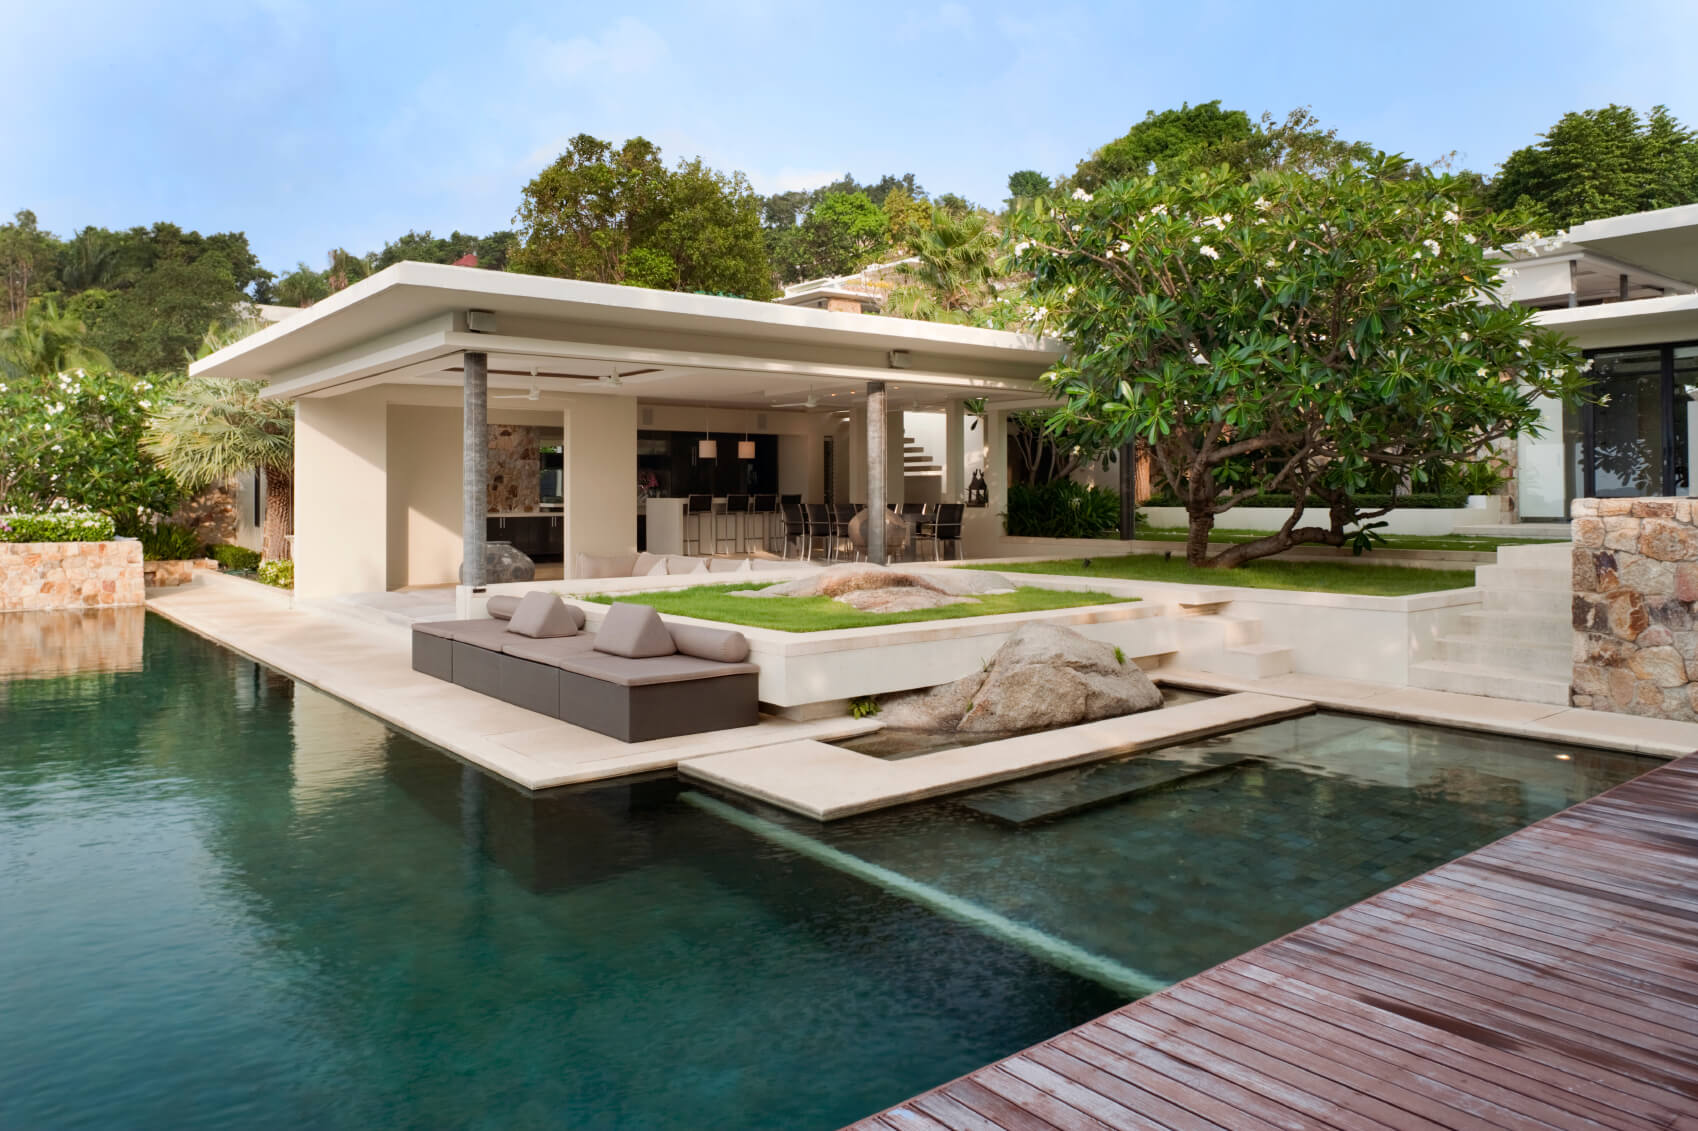 Breezy and Sprawling Tropical Island Villa With Infinity Pool